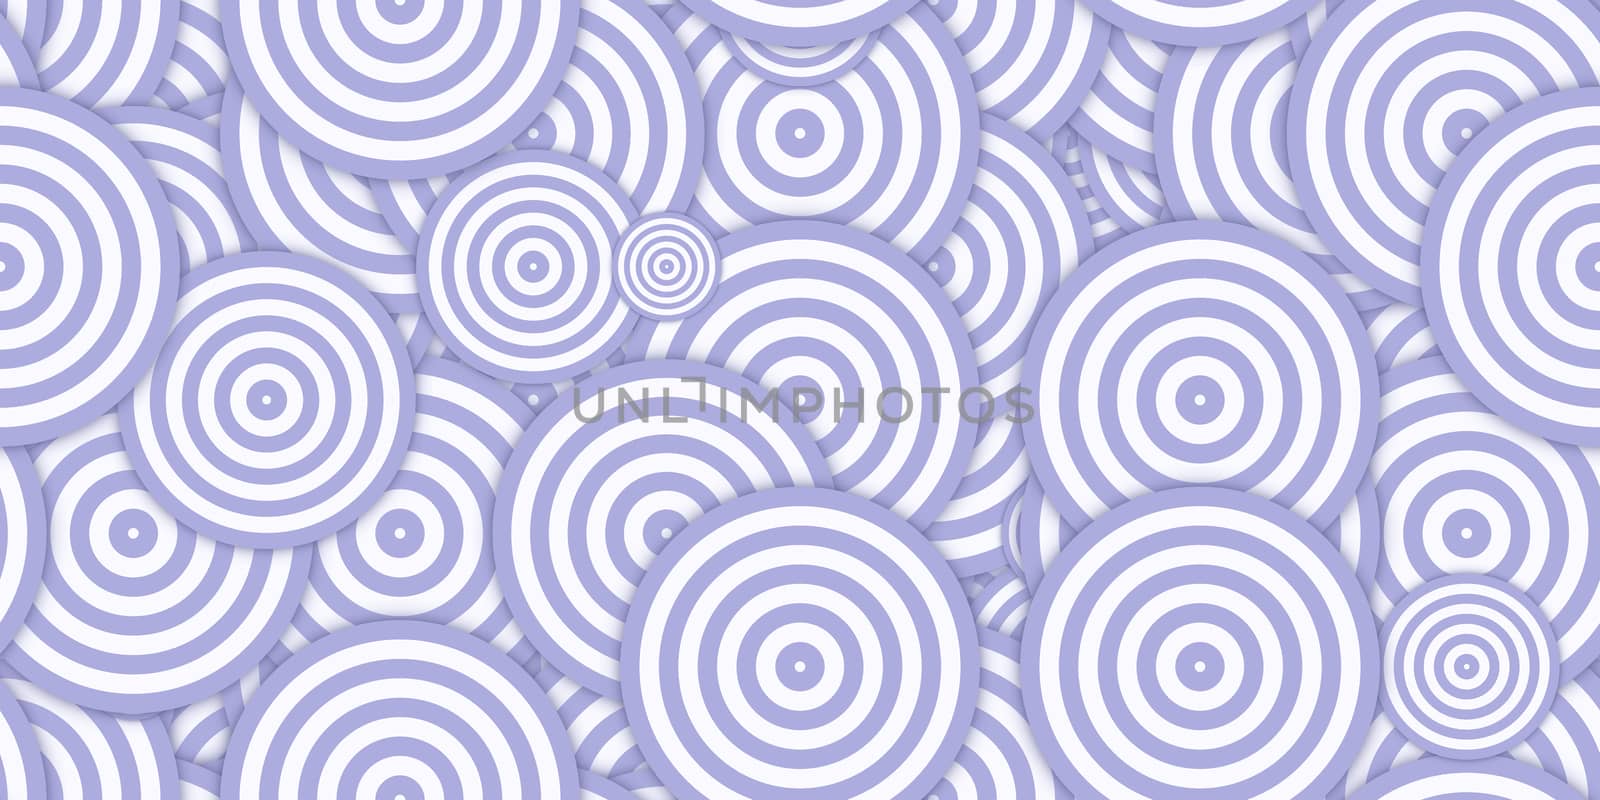 Purple Circles Сoncentric Polygons Backgrounds. Seamless Hypnotic Psychedelic Compositions.